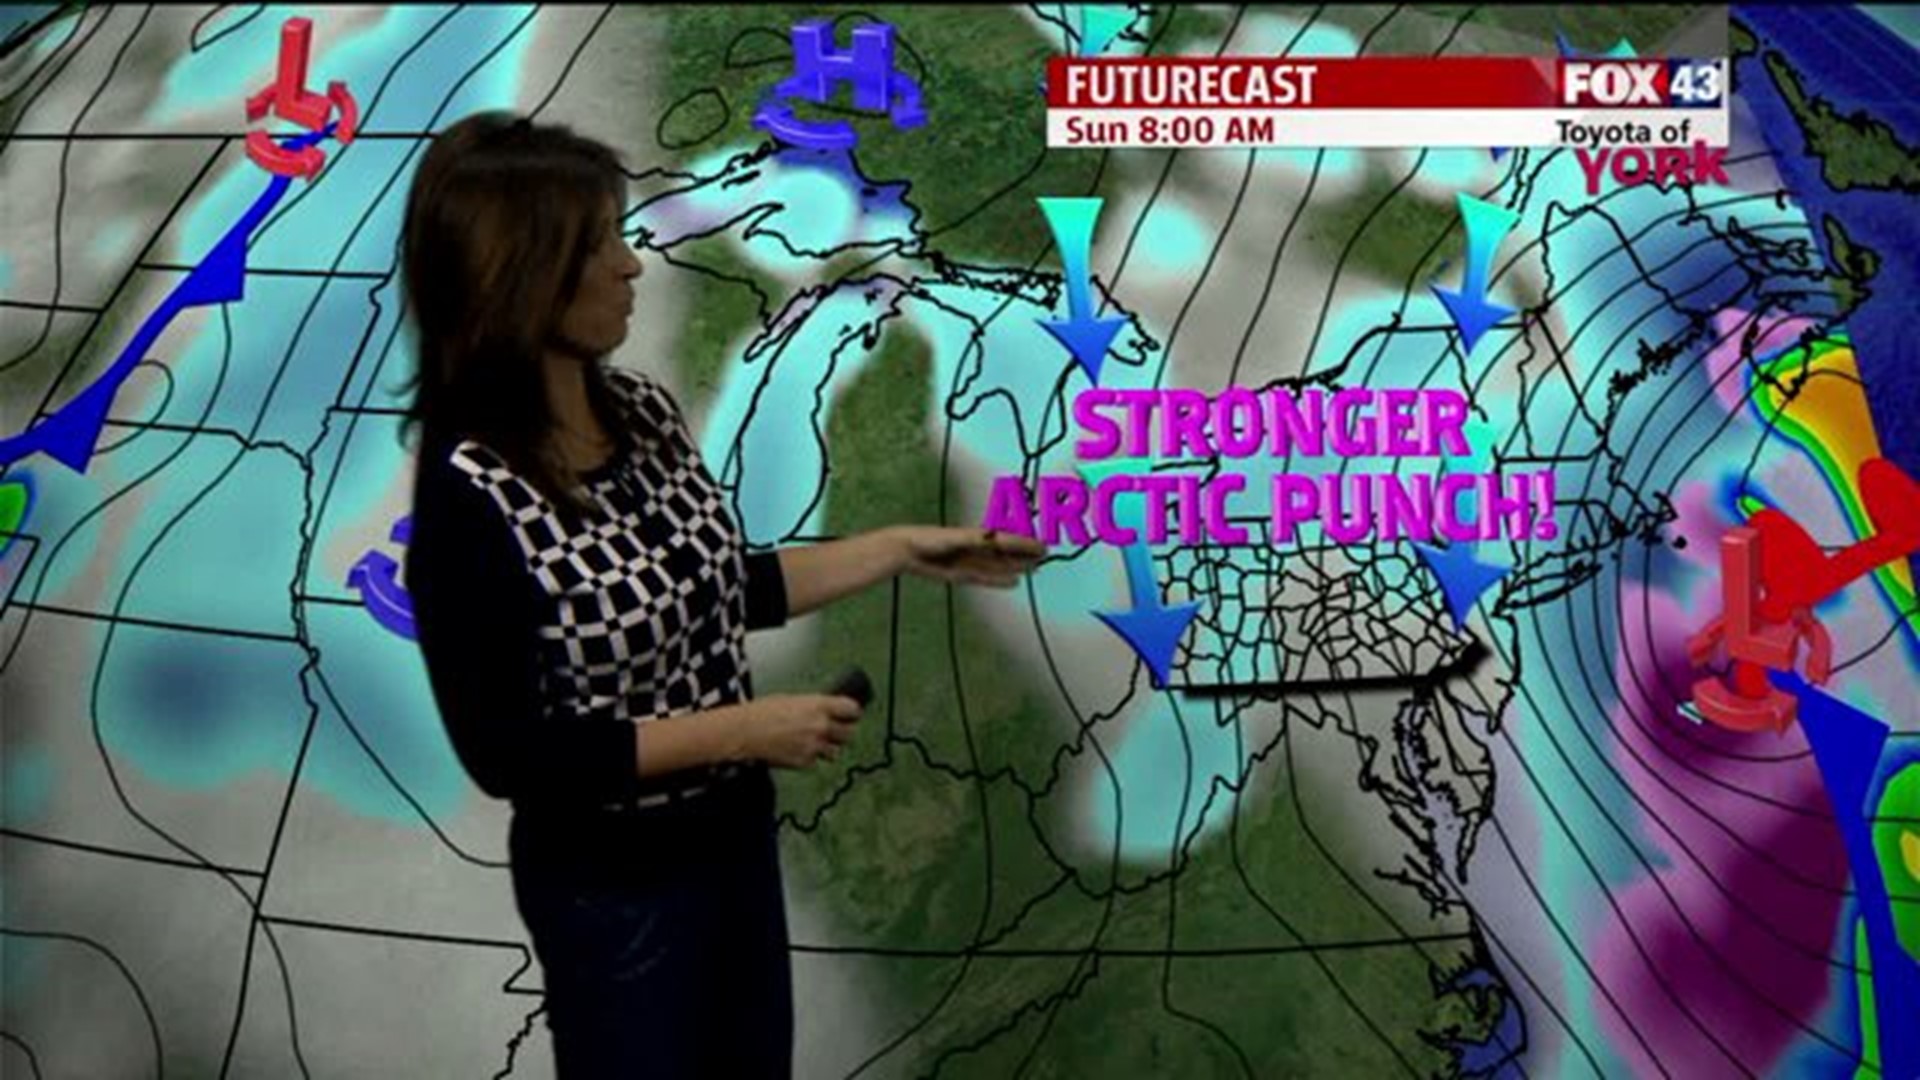 Friday Afternoon Weather Forecast